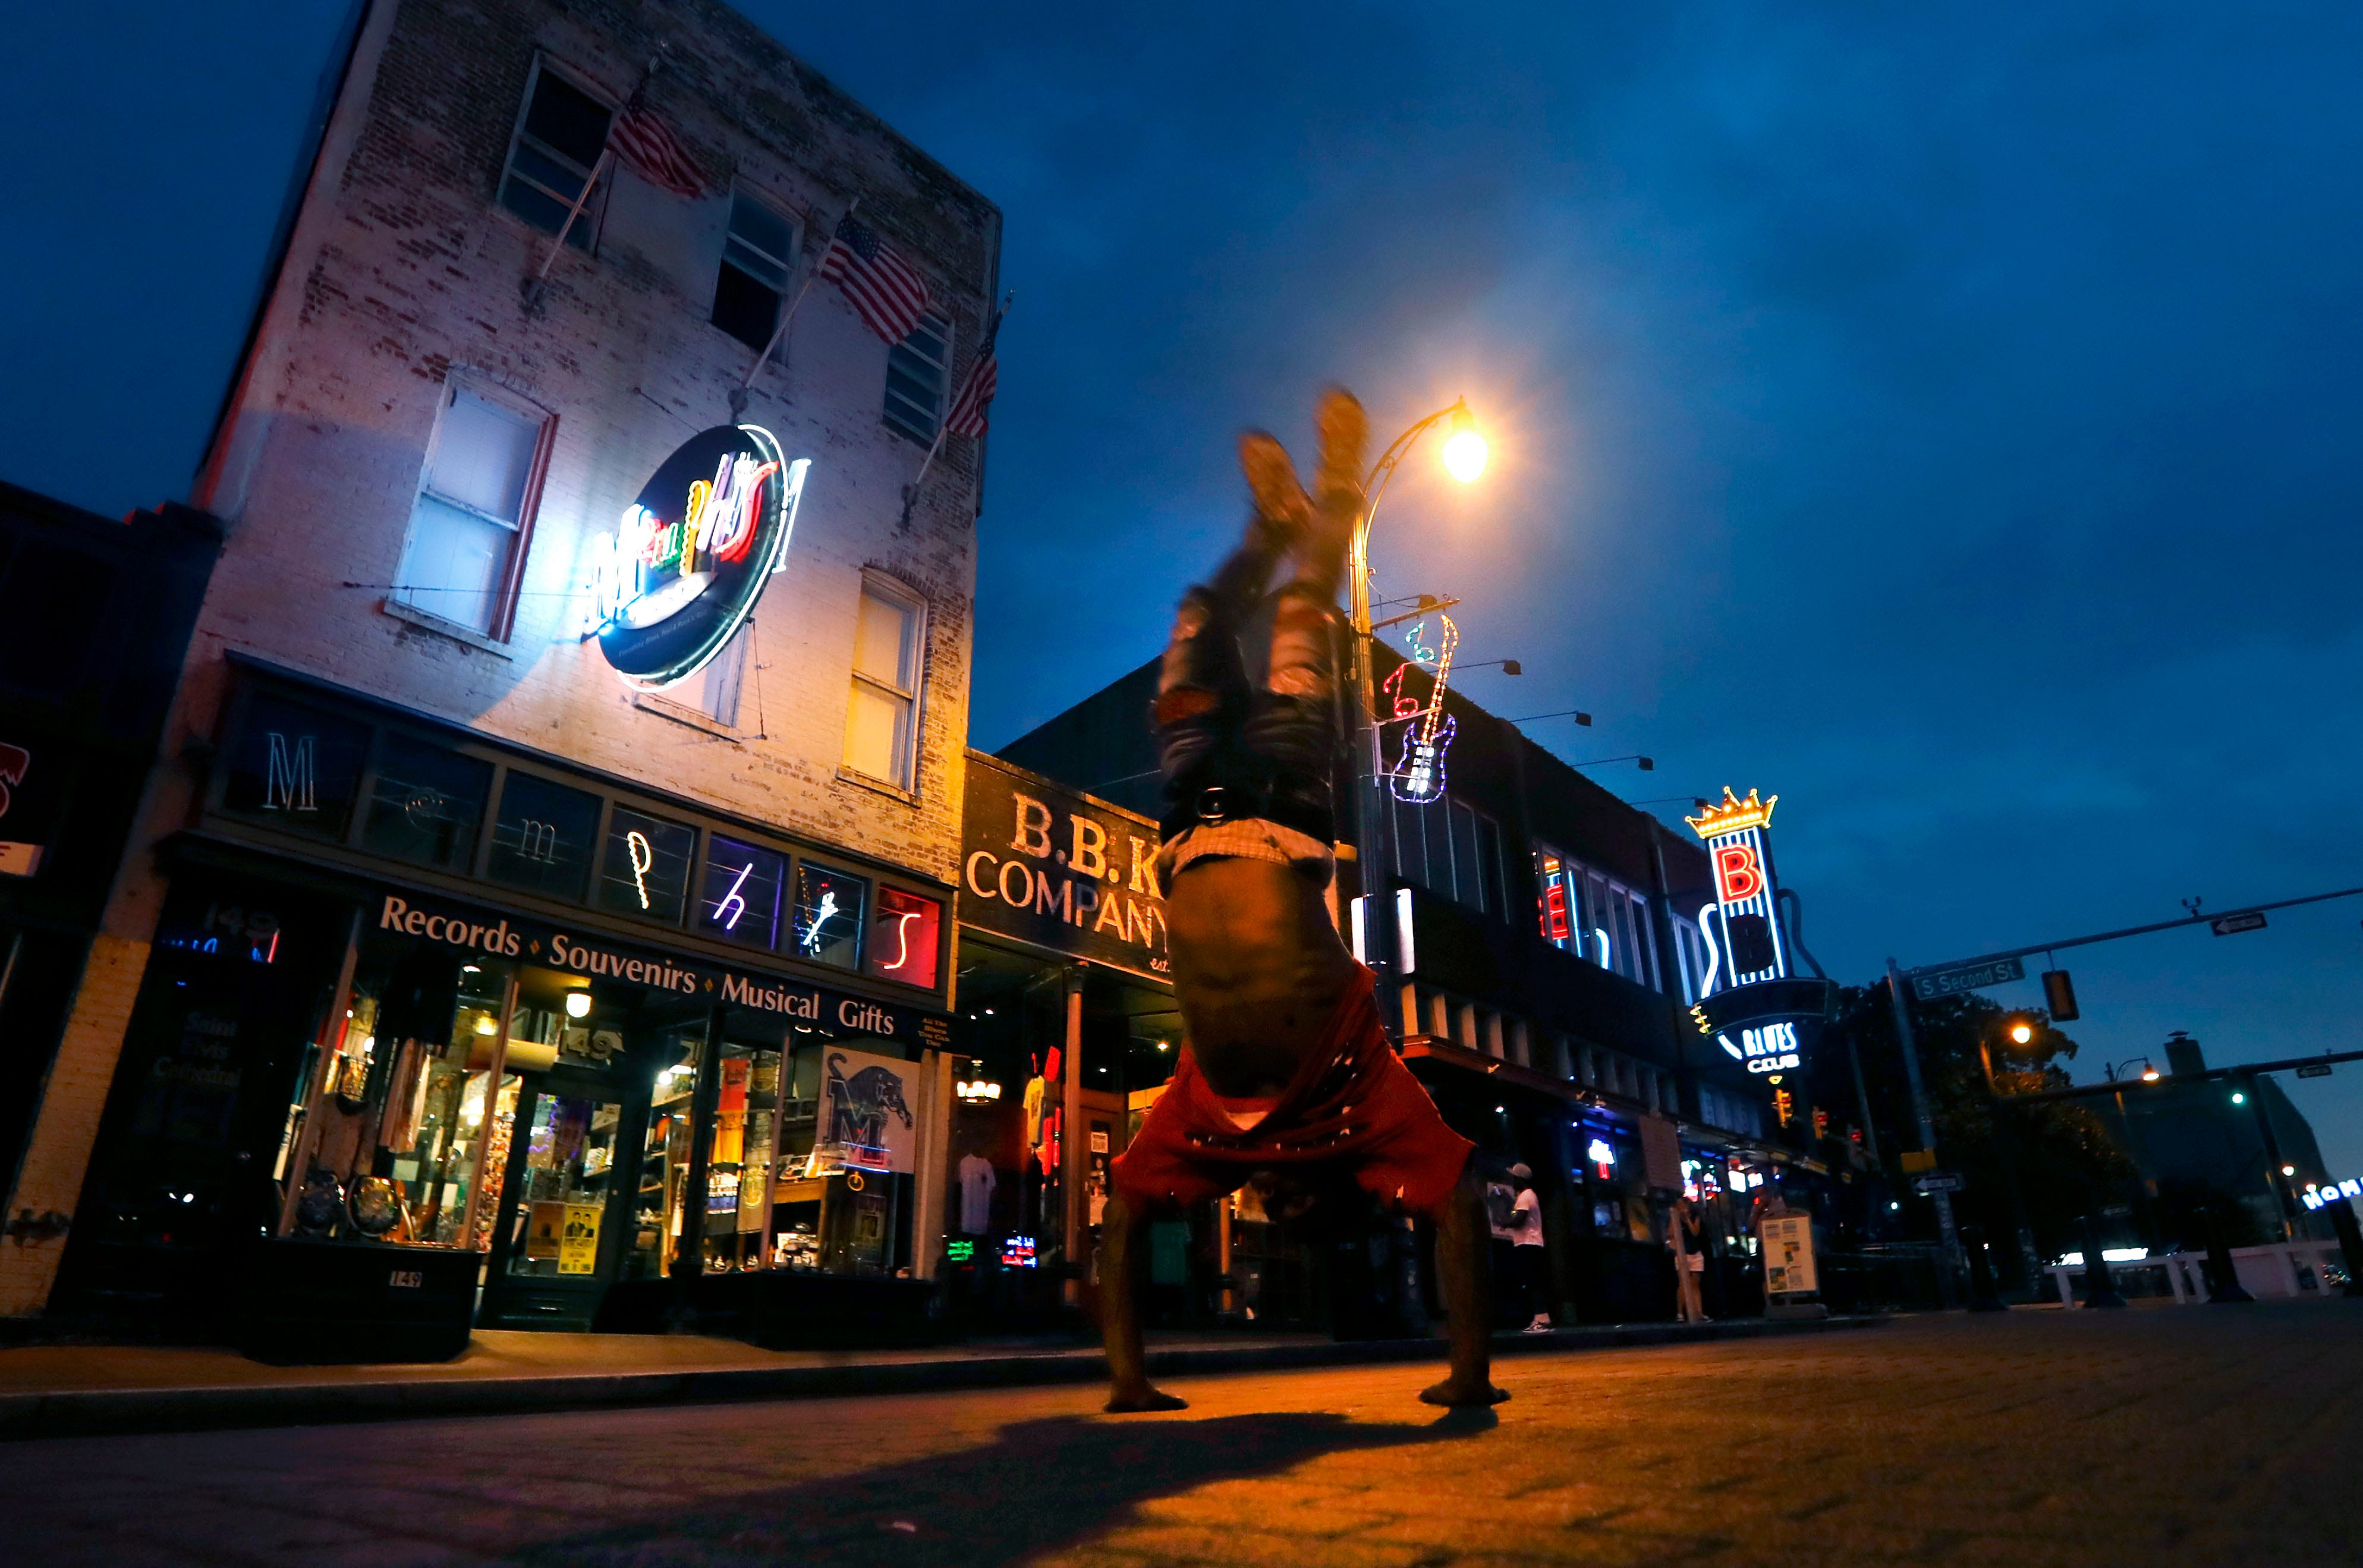 Clarence Henderson flips down Beale Street after sunset on Tuesday, Sept. 1, 2020.